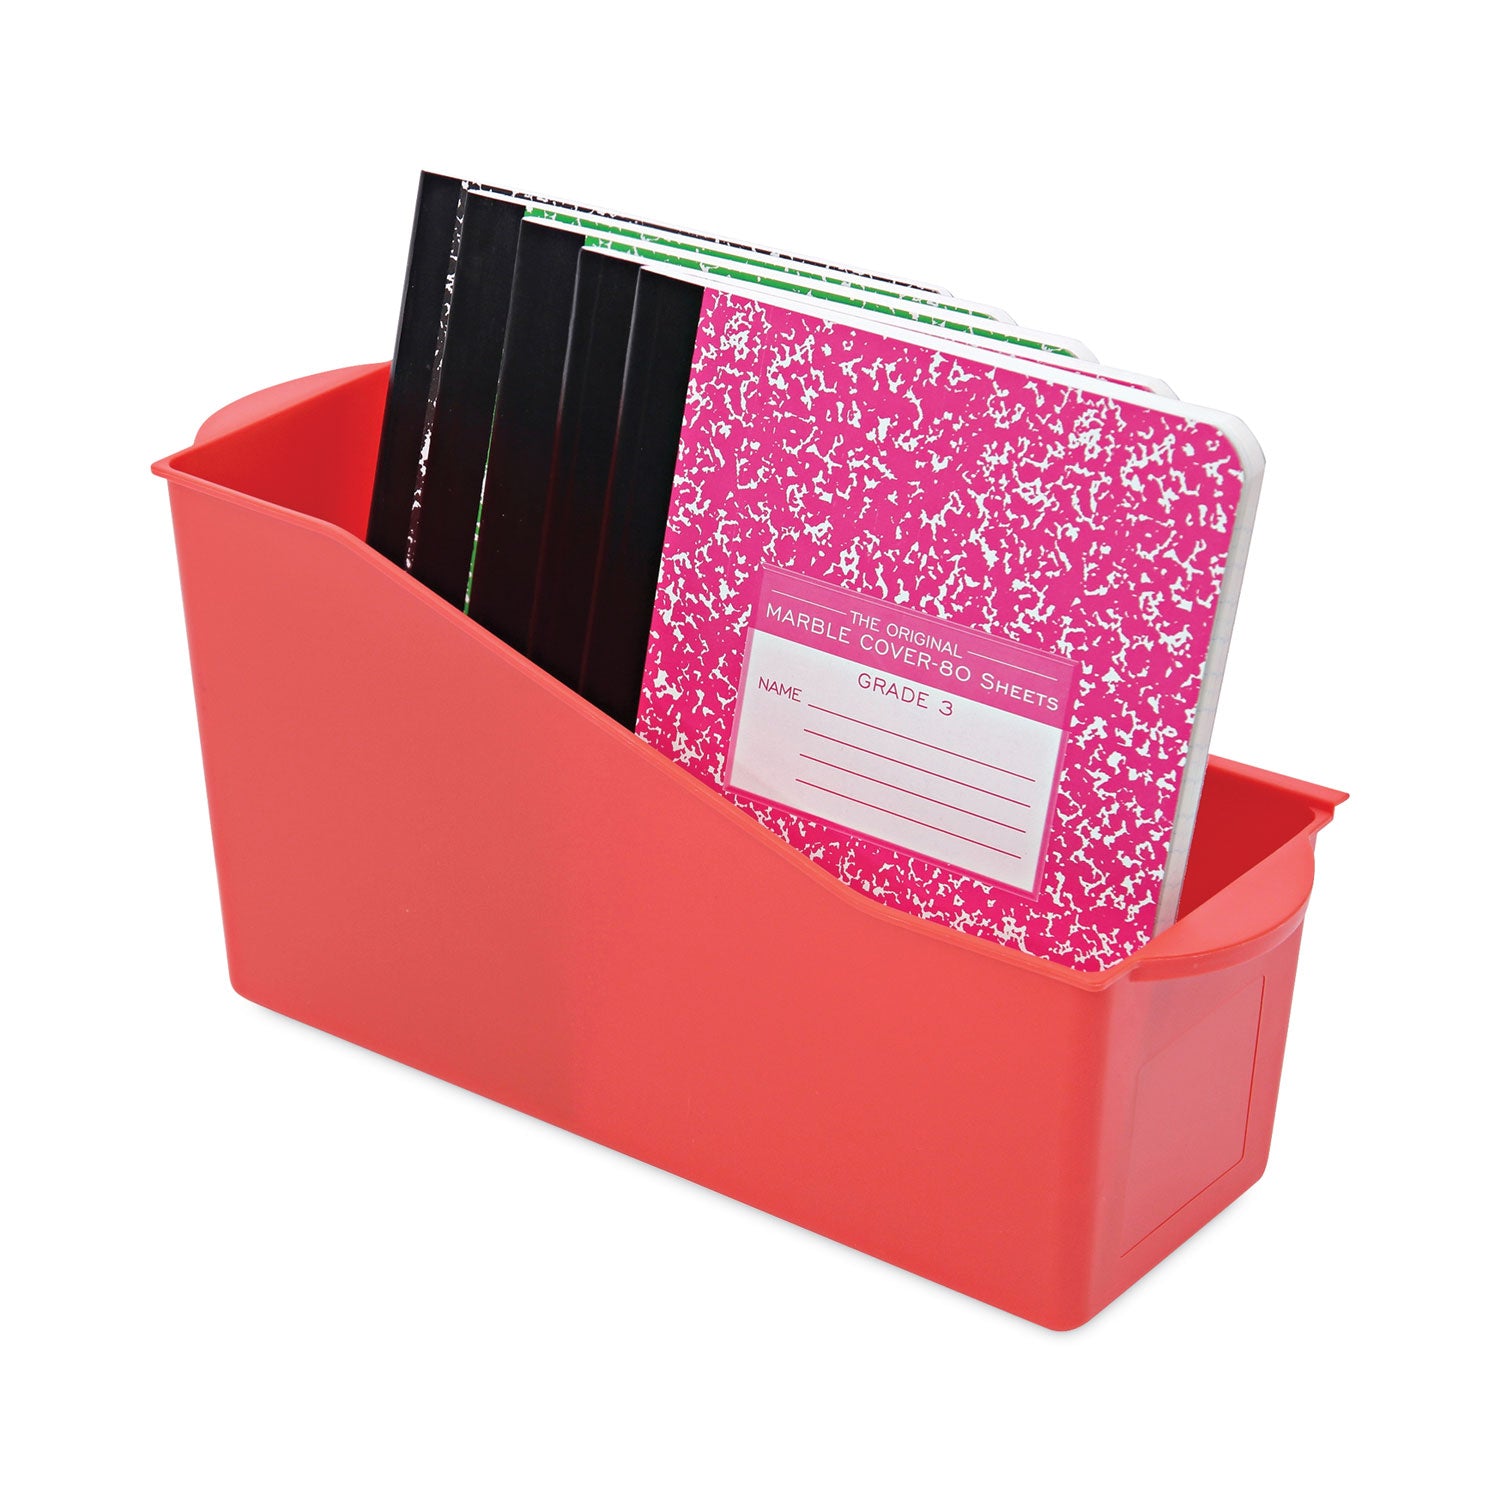 antimicrobial-book-bin-142-x-534-x-735-red_def39508red - 4